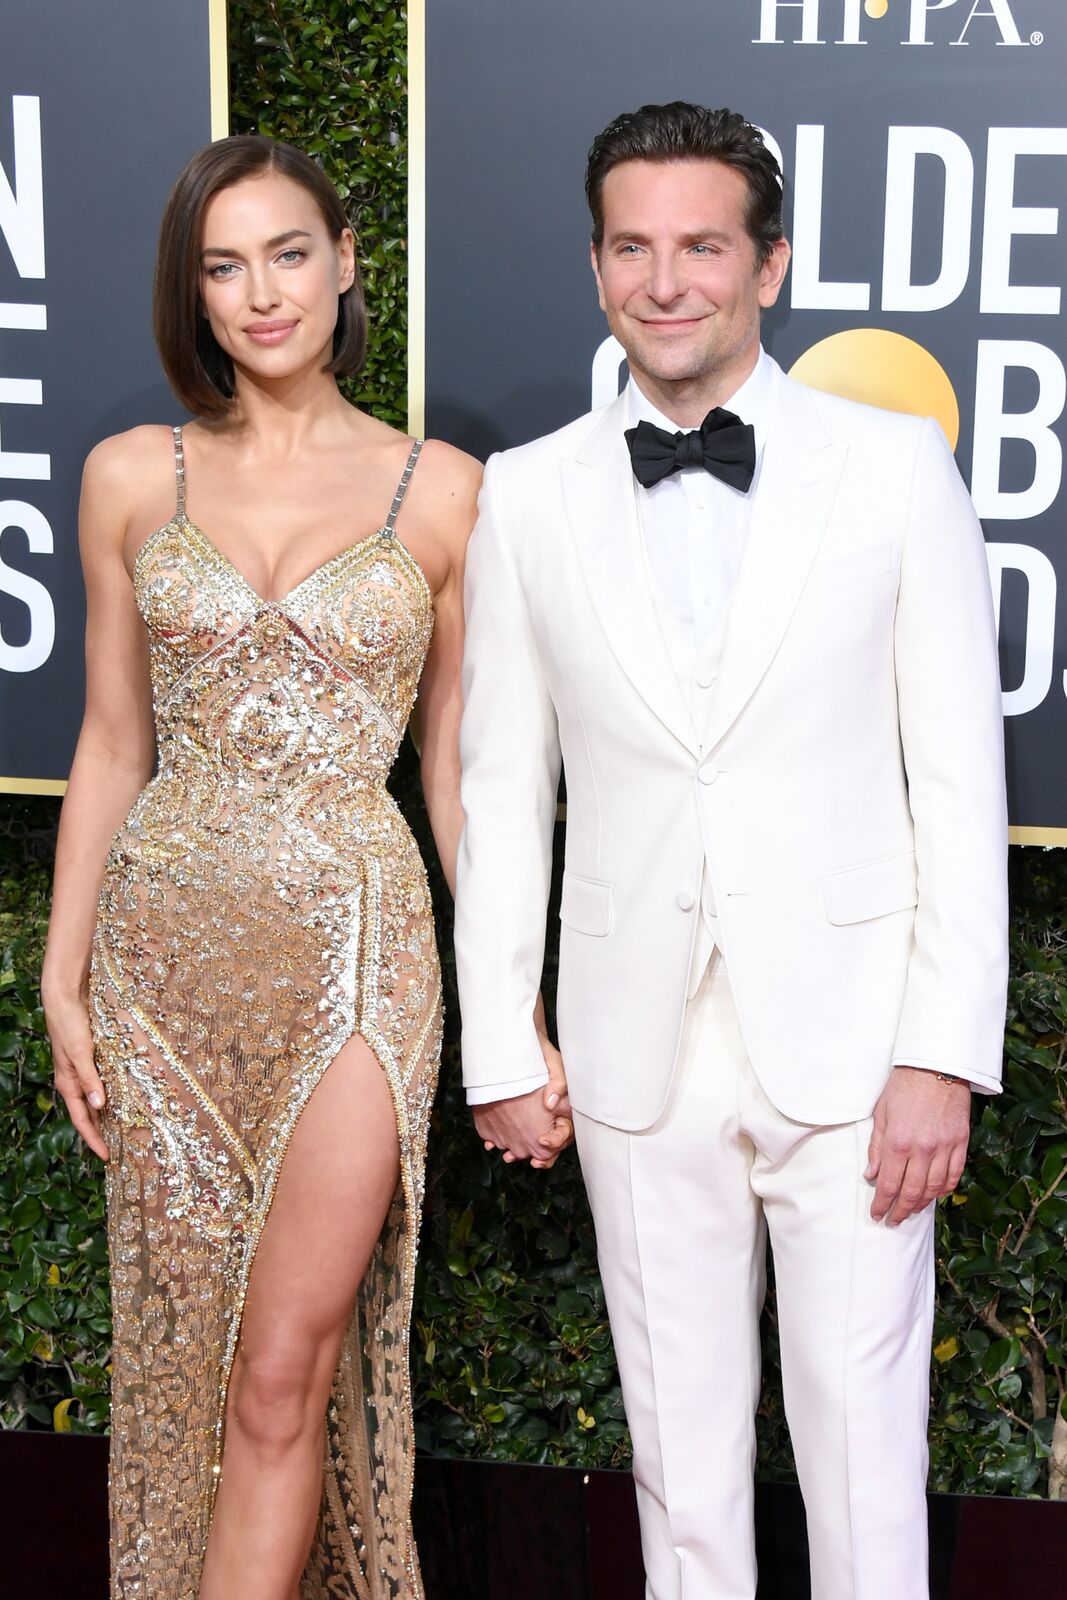 Irina Shayk and Bradley Cooper attend the 76th Annual Golden Globe Awards at The Beverly Hilton Hotel on January 6, 2019 in Beverly Hills, California | Photo: Getty Images